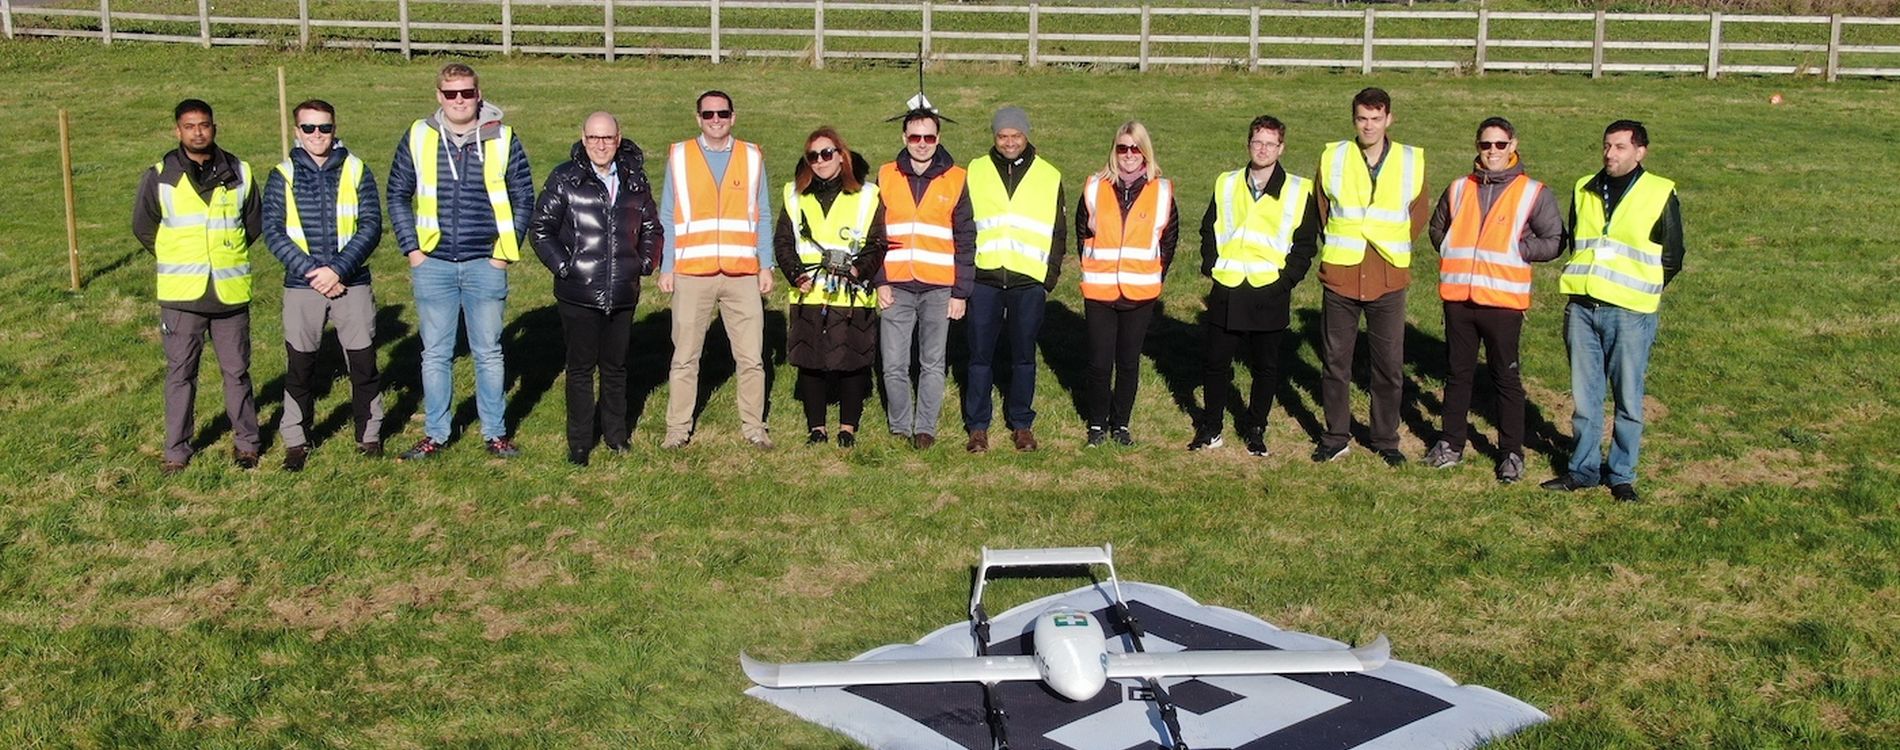 Project RISE successfully increases automation of drone flight approvals and Air Traffic Control integration in non-segregated airspace